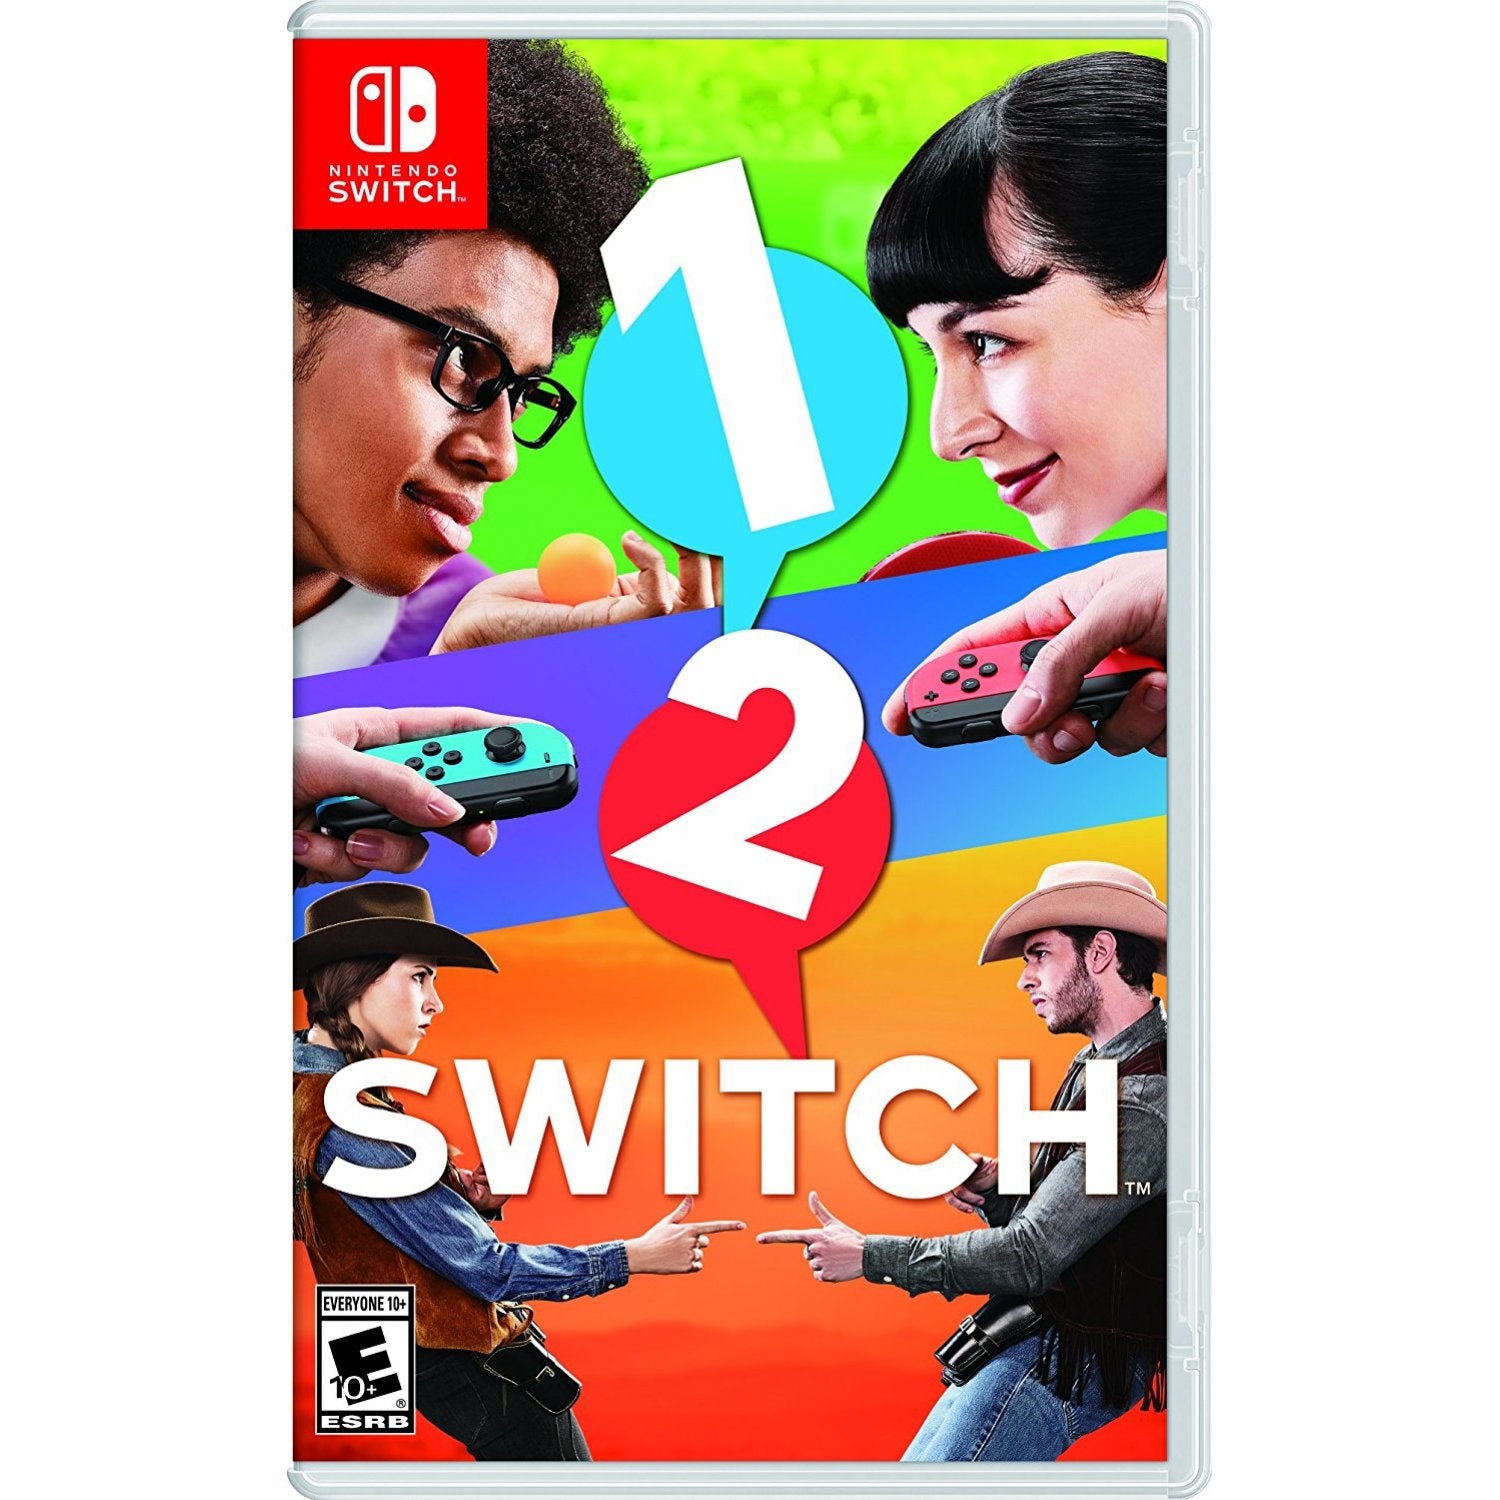 Everybody 1-2-Switch! Review (Switch)